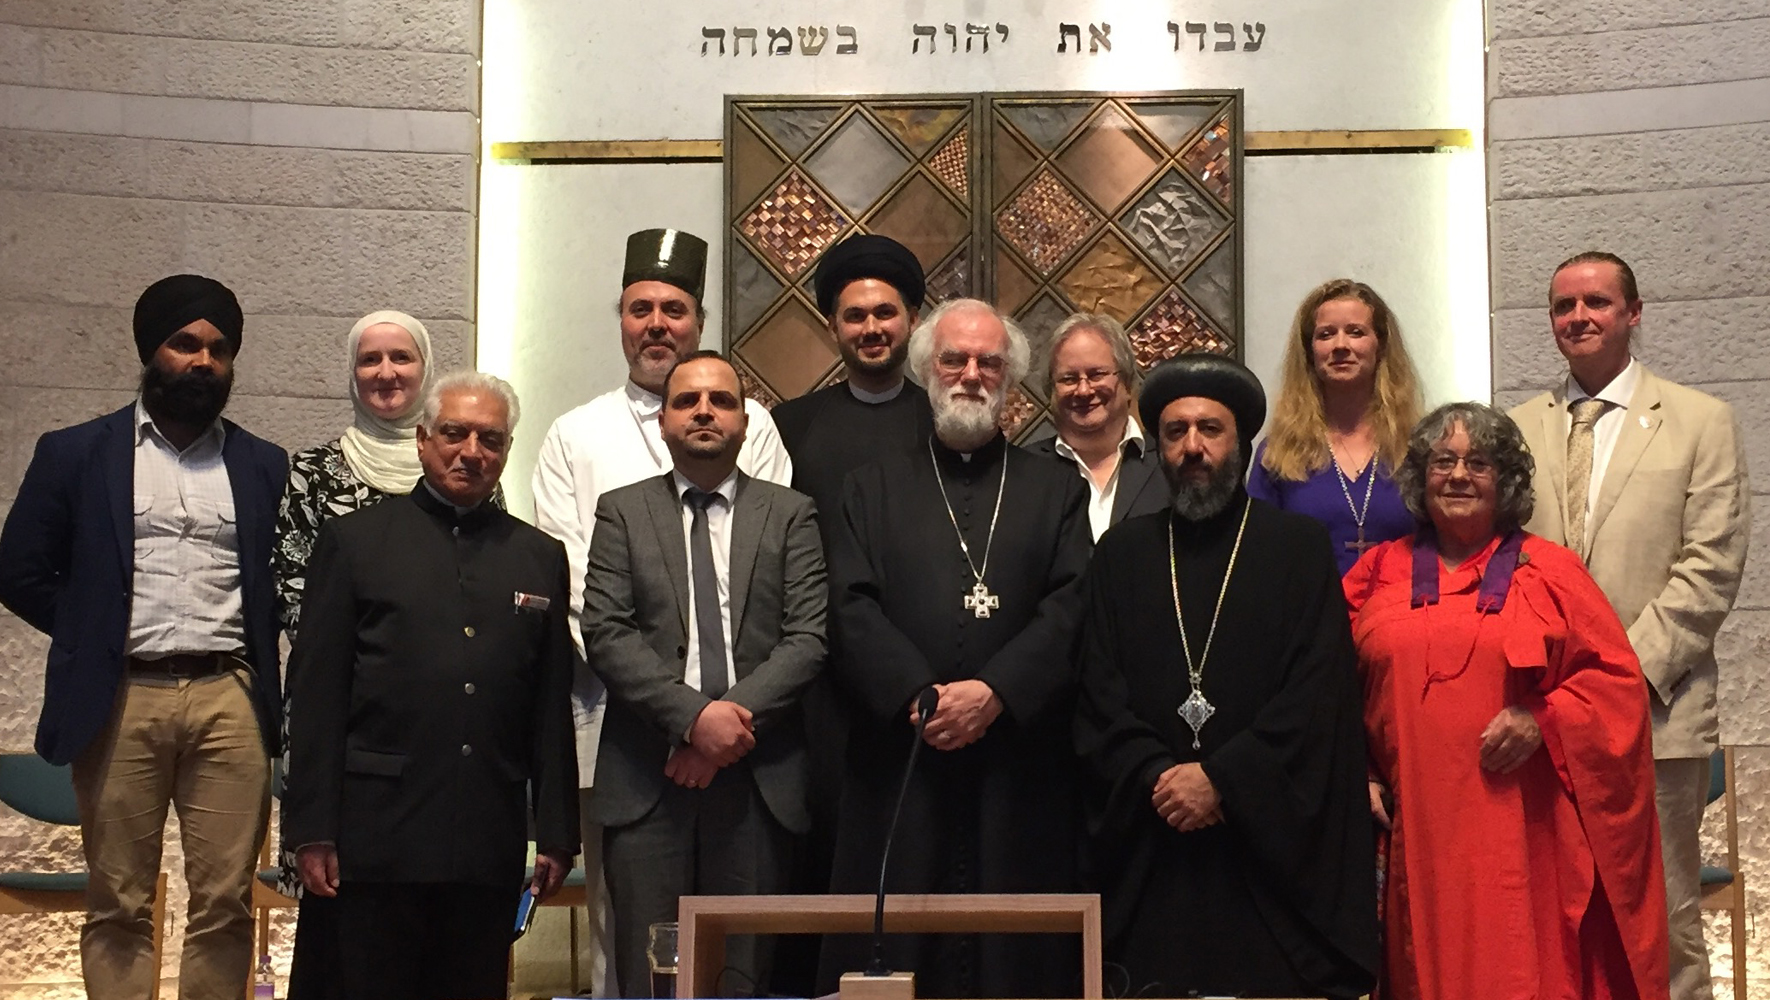 A group of twelve faith leaders are standing in front of the ark in a synagogue.